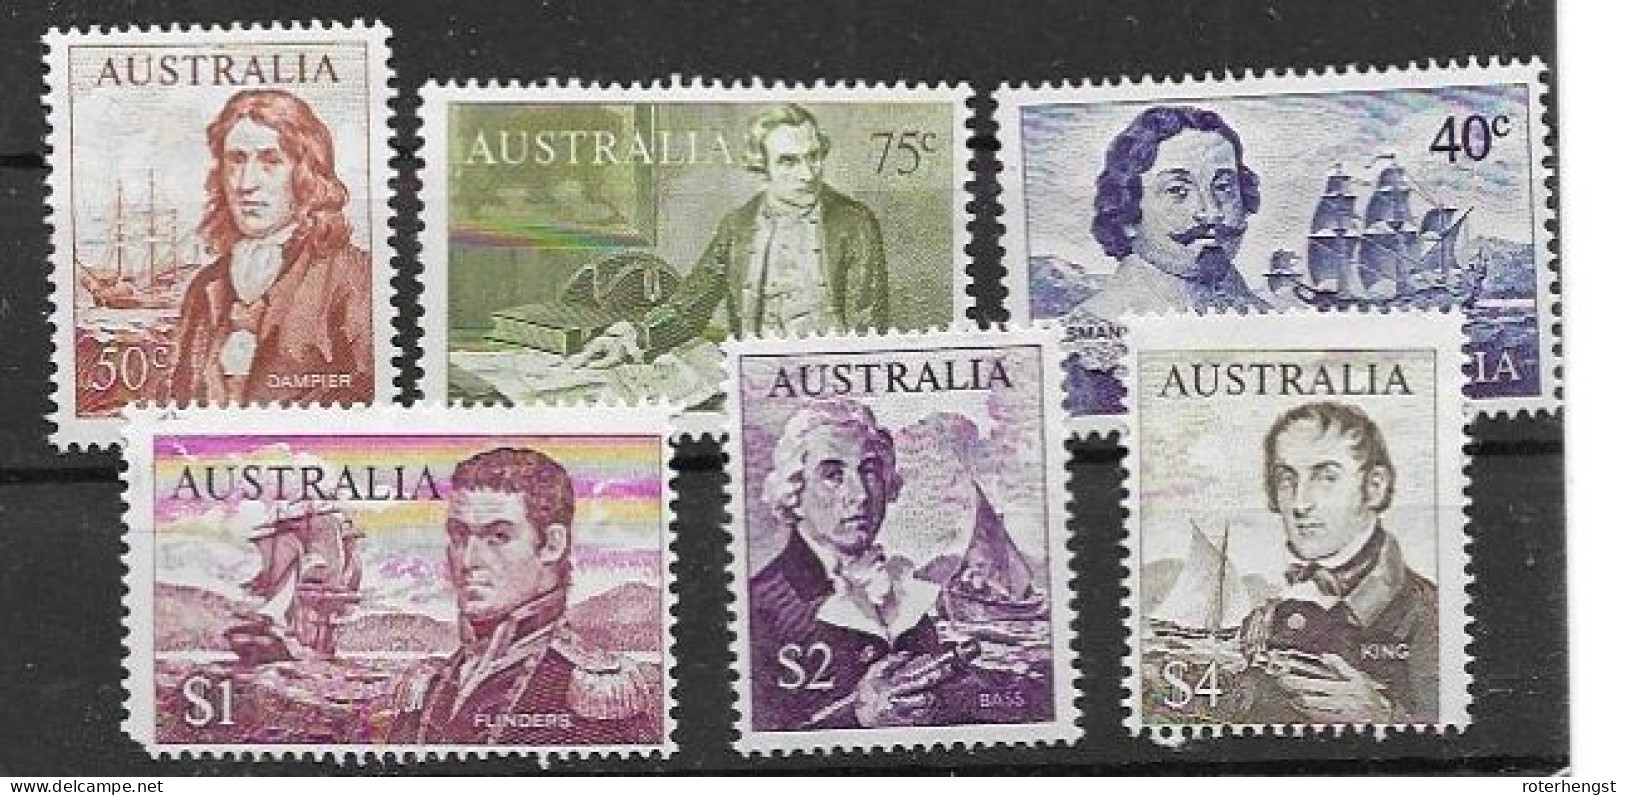 Australia Explorers Complete Set Mh * (45 Euros) But 1$ Is Faulty (missing Corner Perf) 1966 - Mint Stamps